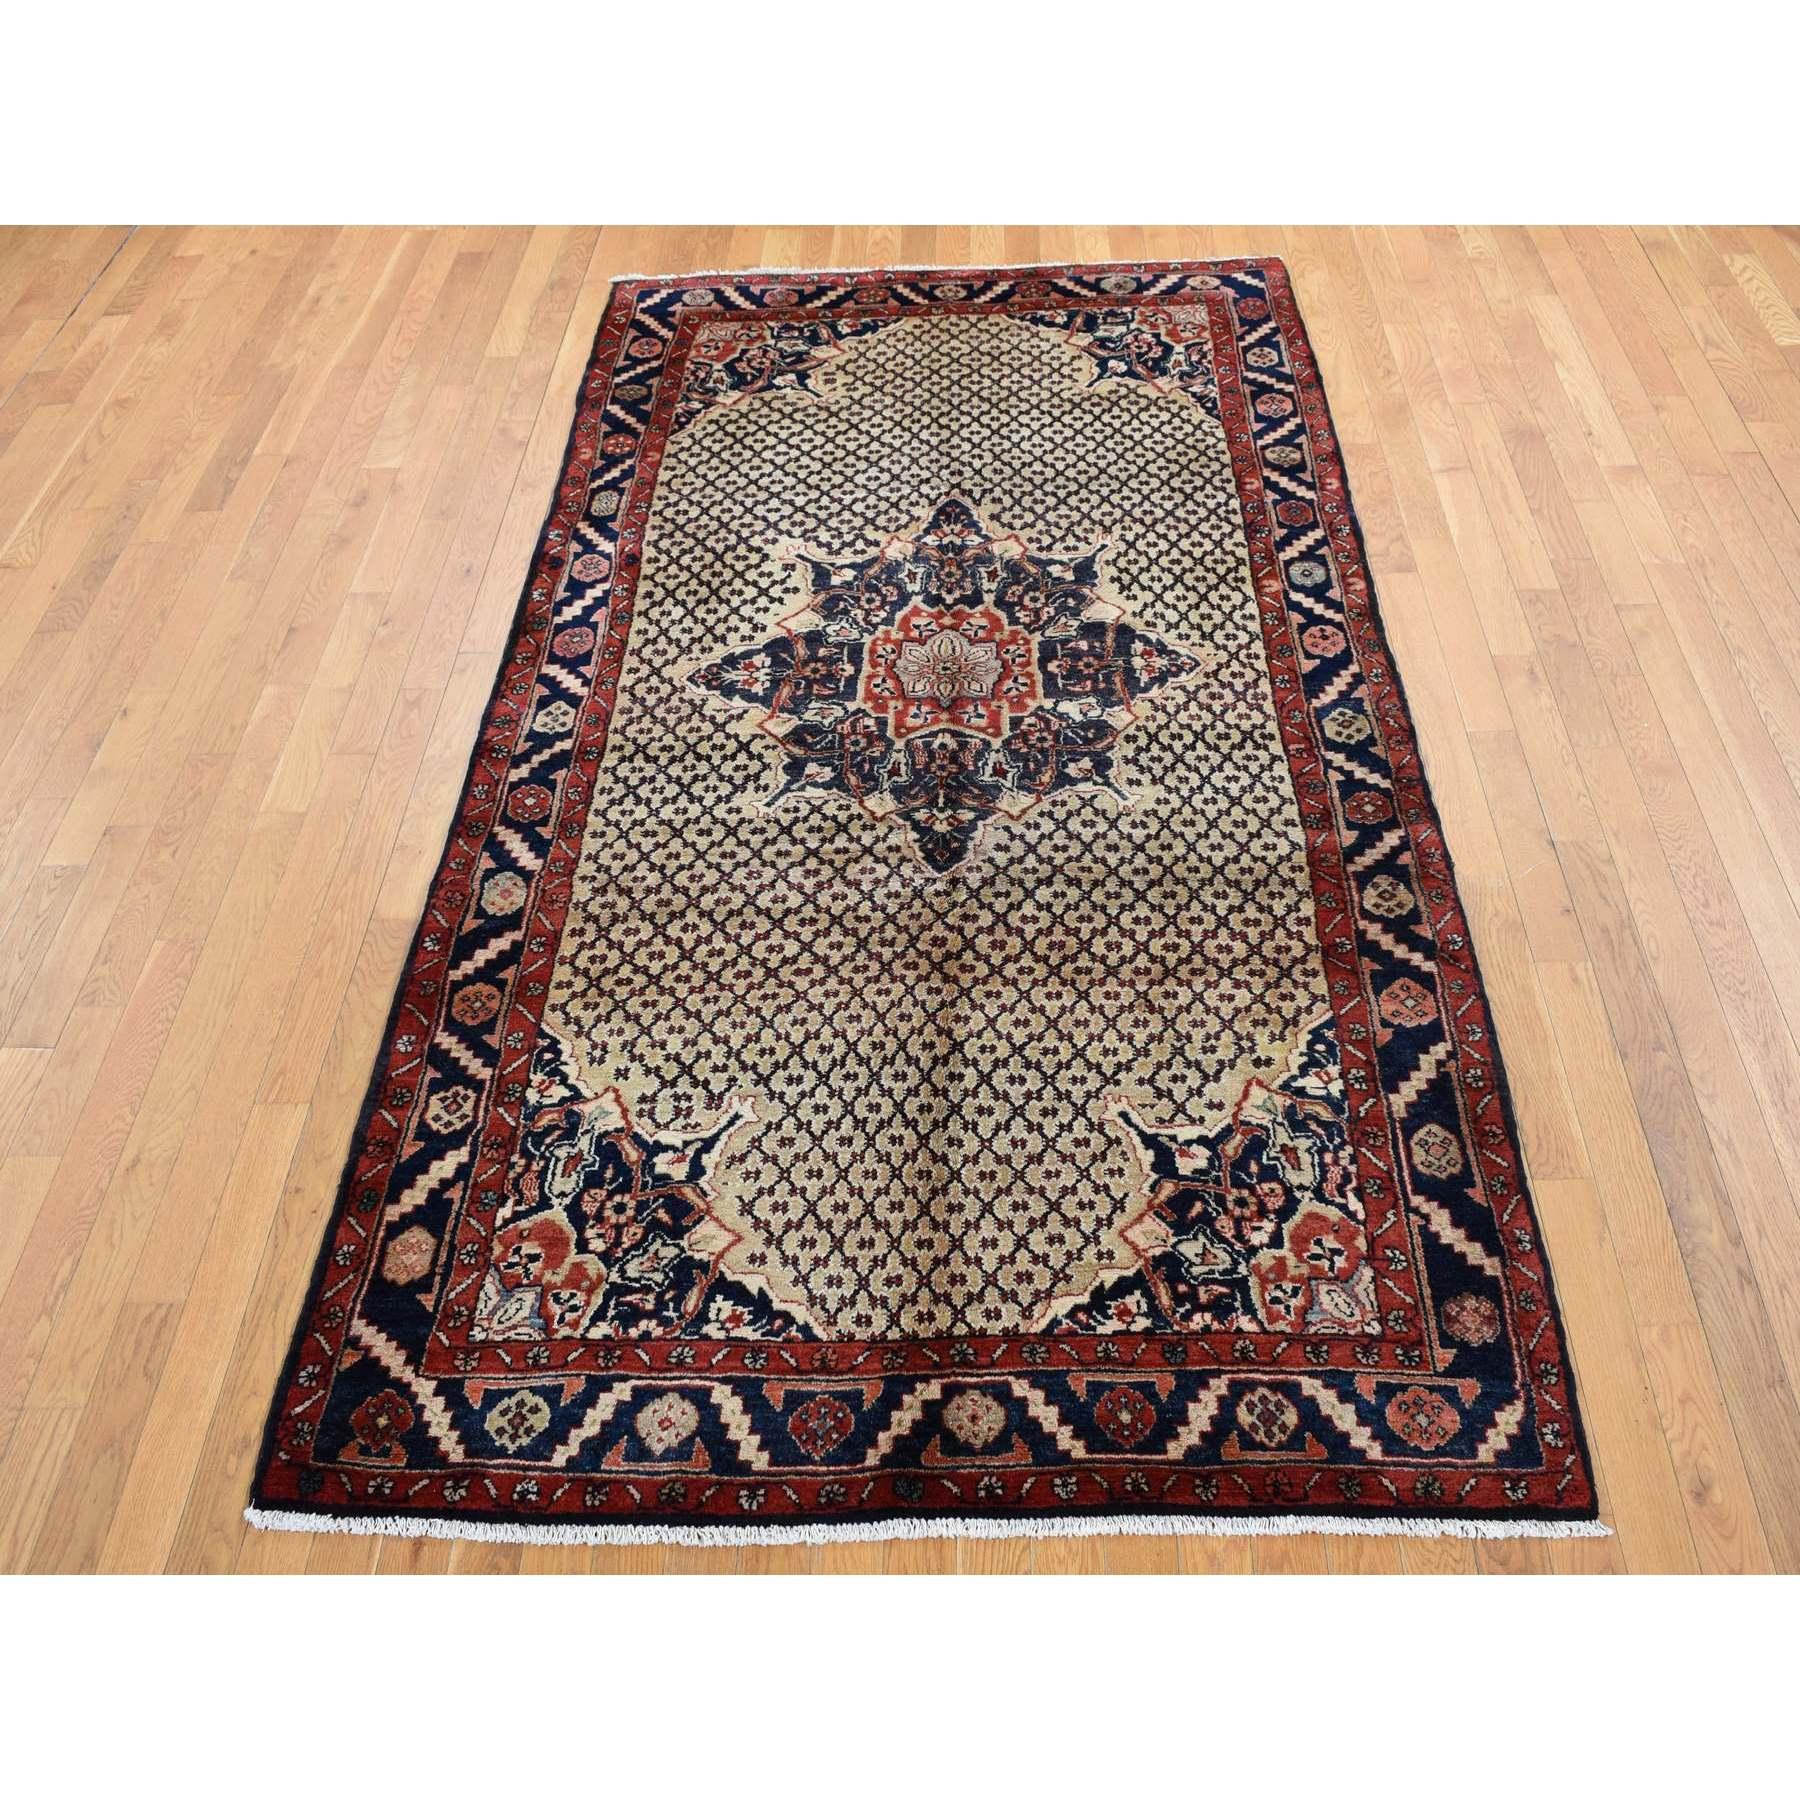 This fabulous Hand-Knotted carpet has been created and designed for extra strength and durability. This rug has been handcrafted for weeks in the traditional method that is used to make
Exact Rug Size in Feet and Inches : 5'2